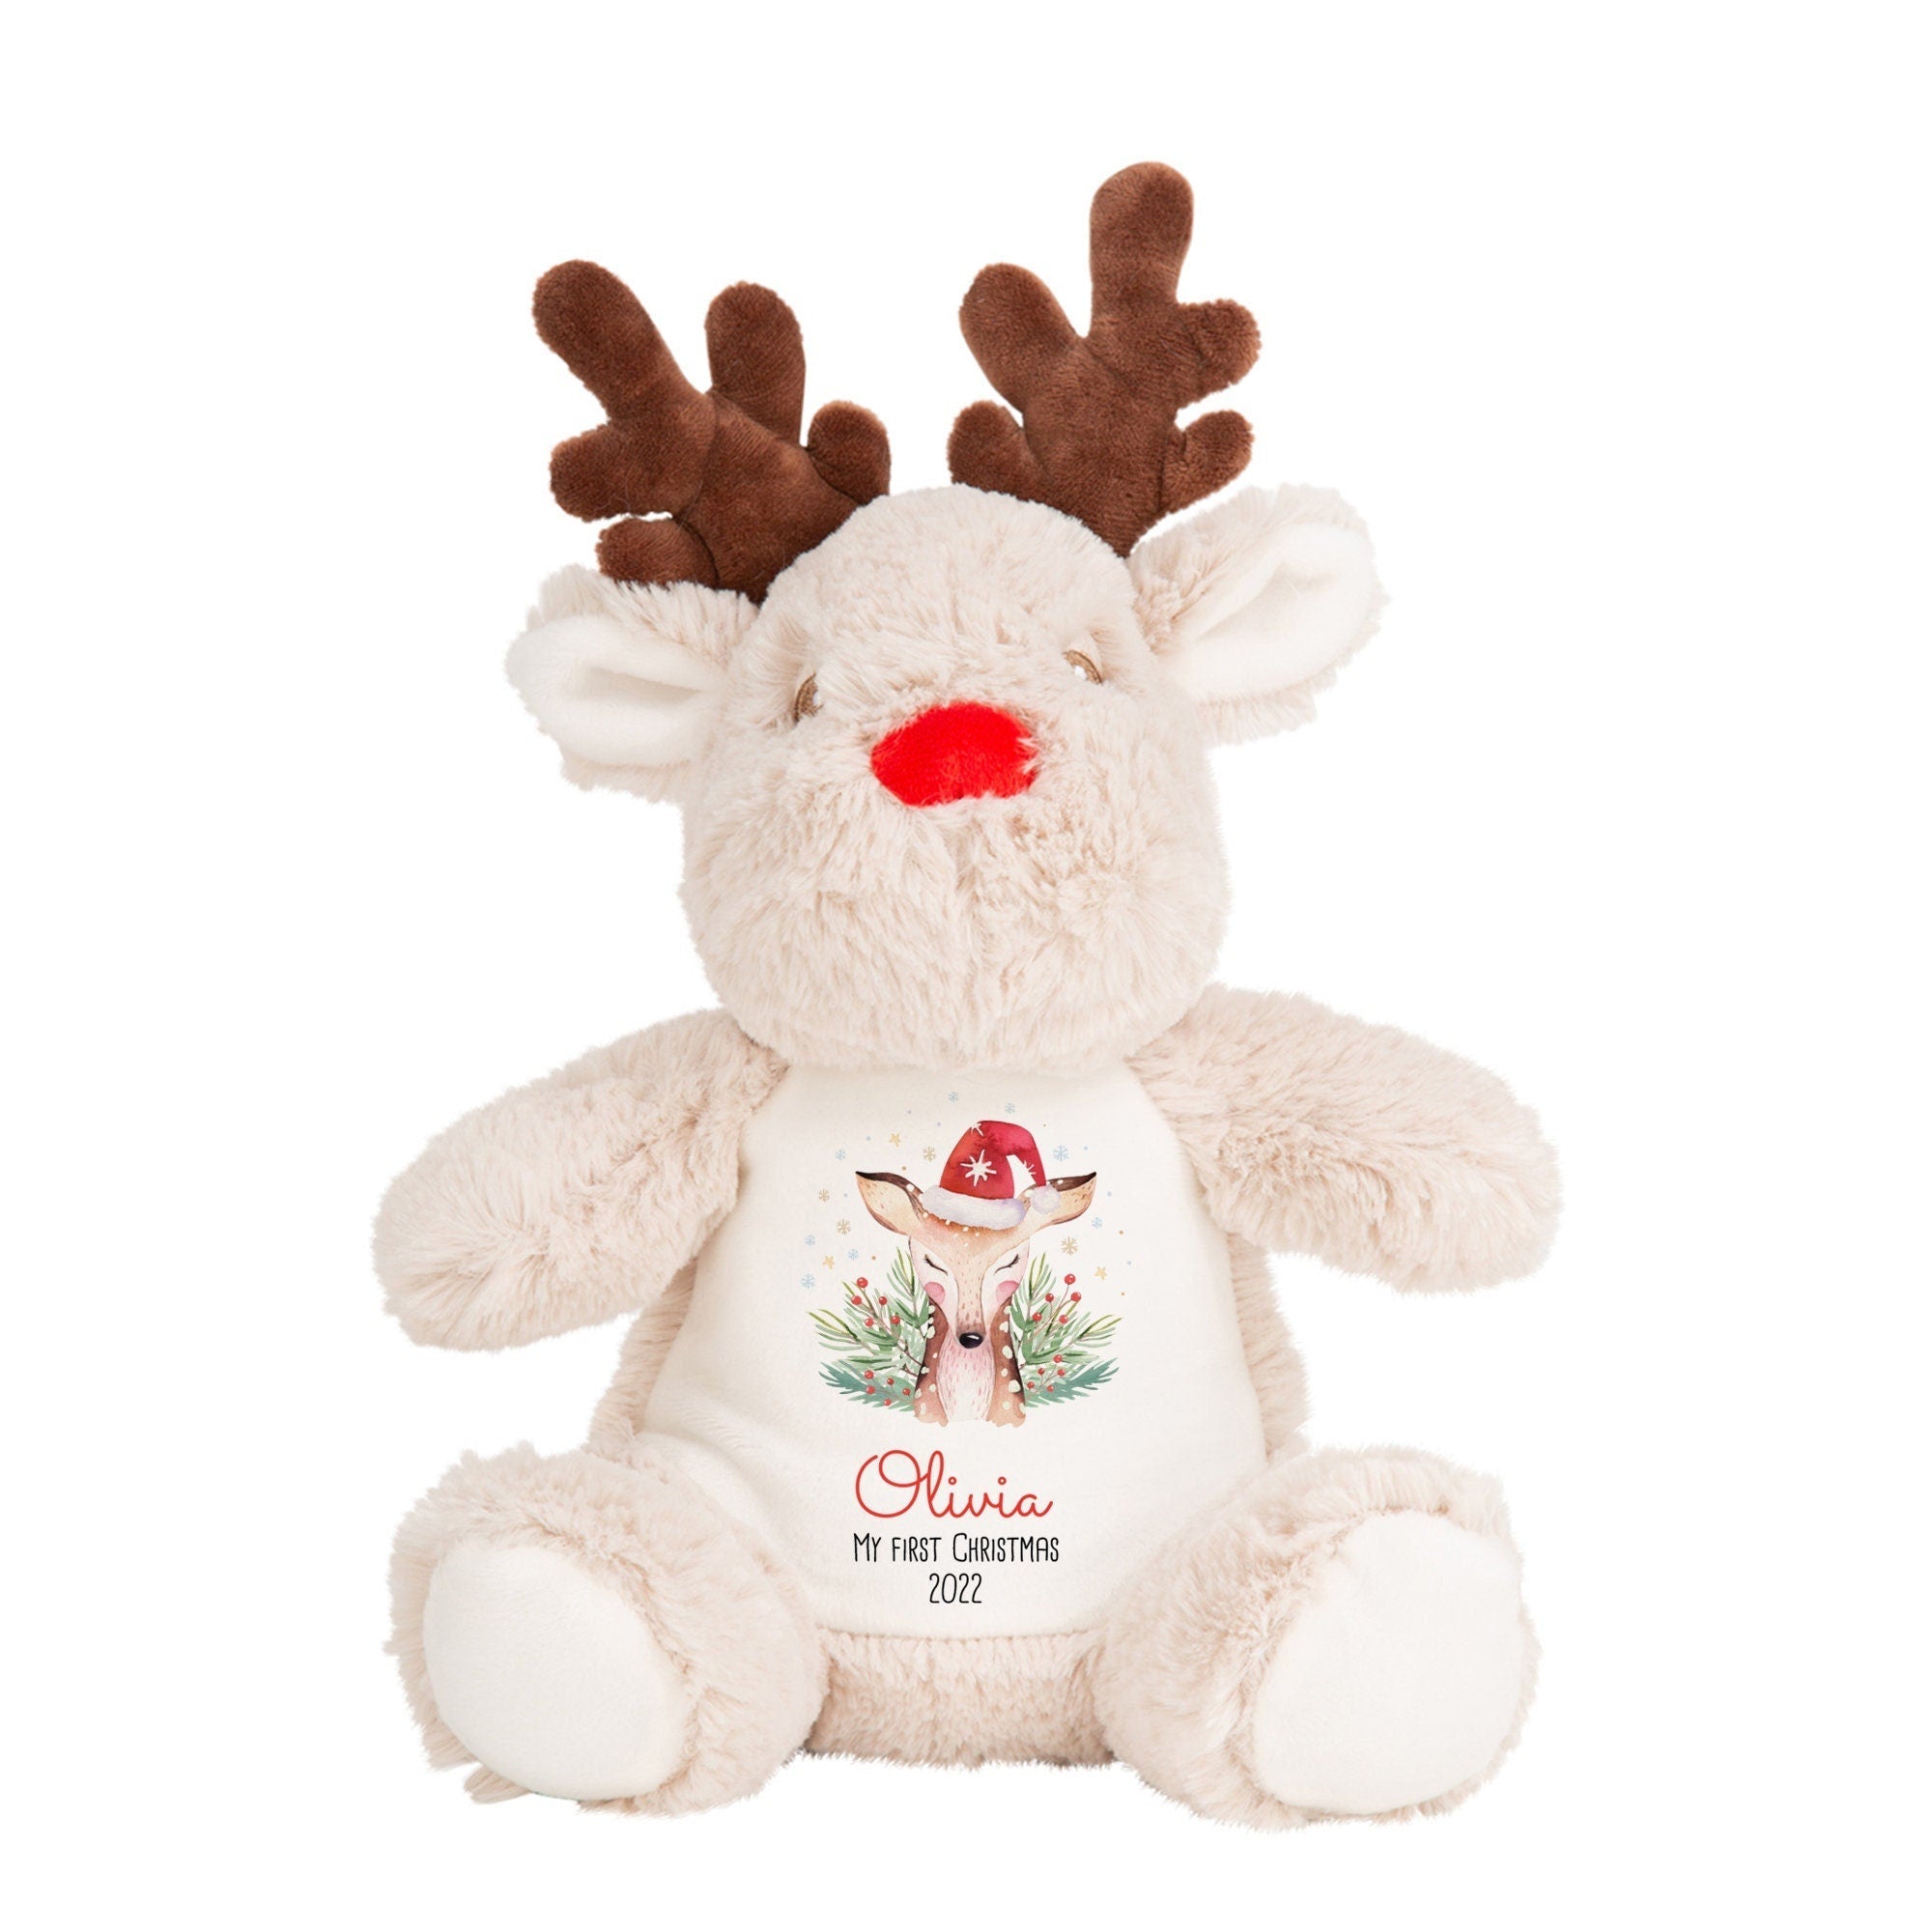 Personalised My First Christmas Soft Toy, 1St Xmas, Cute Reindeer, Teddy Plush